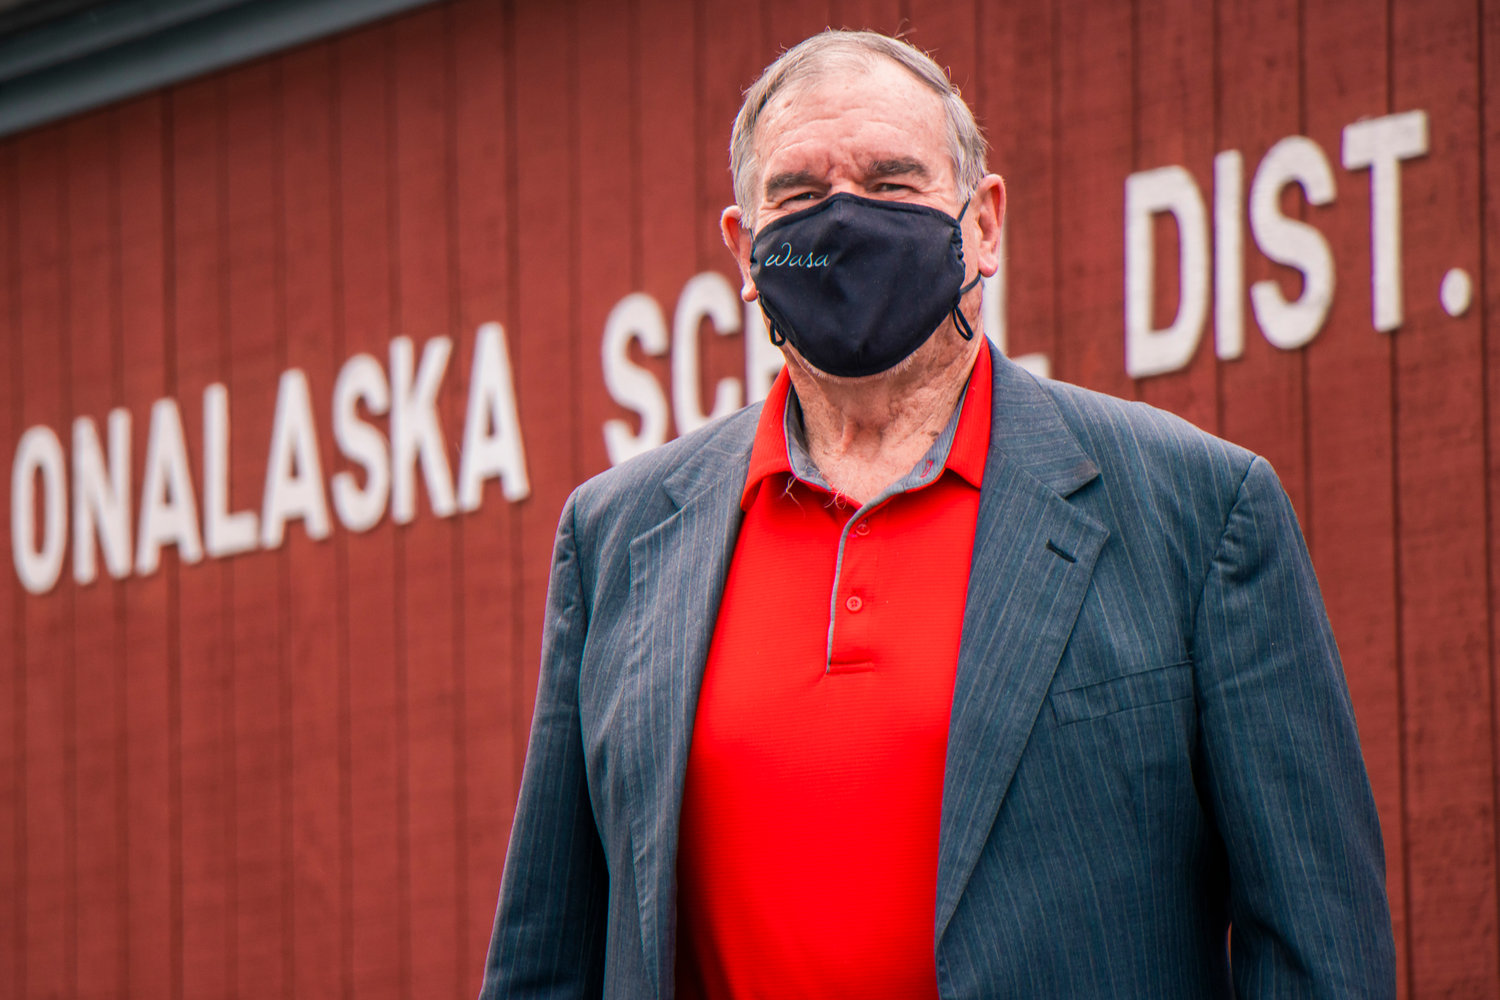 Onalaska Superintendent Jeff Davis poses for a photo outside the school district office on Tuesday.